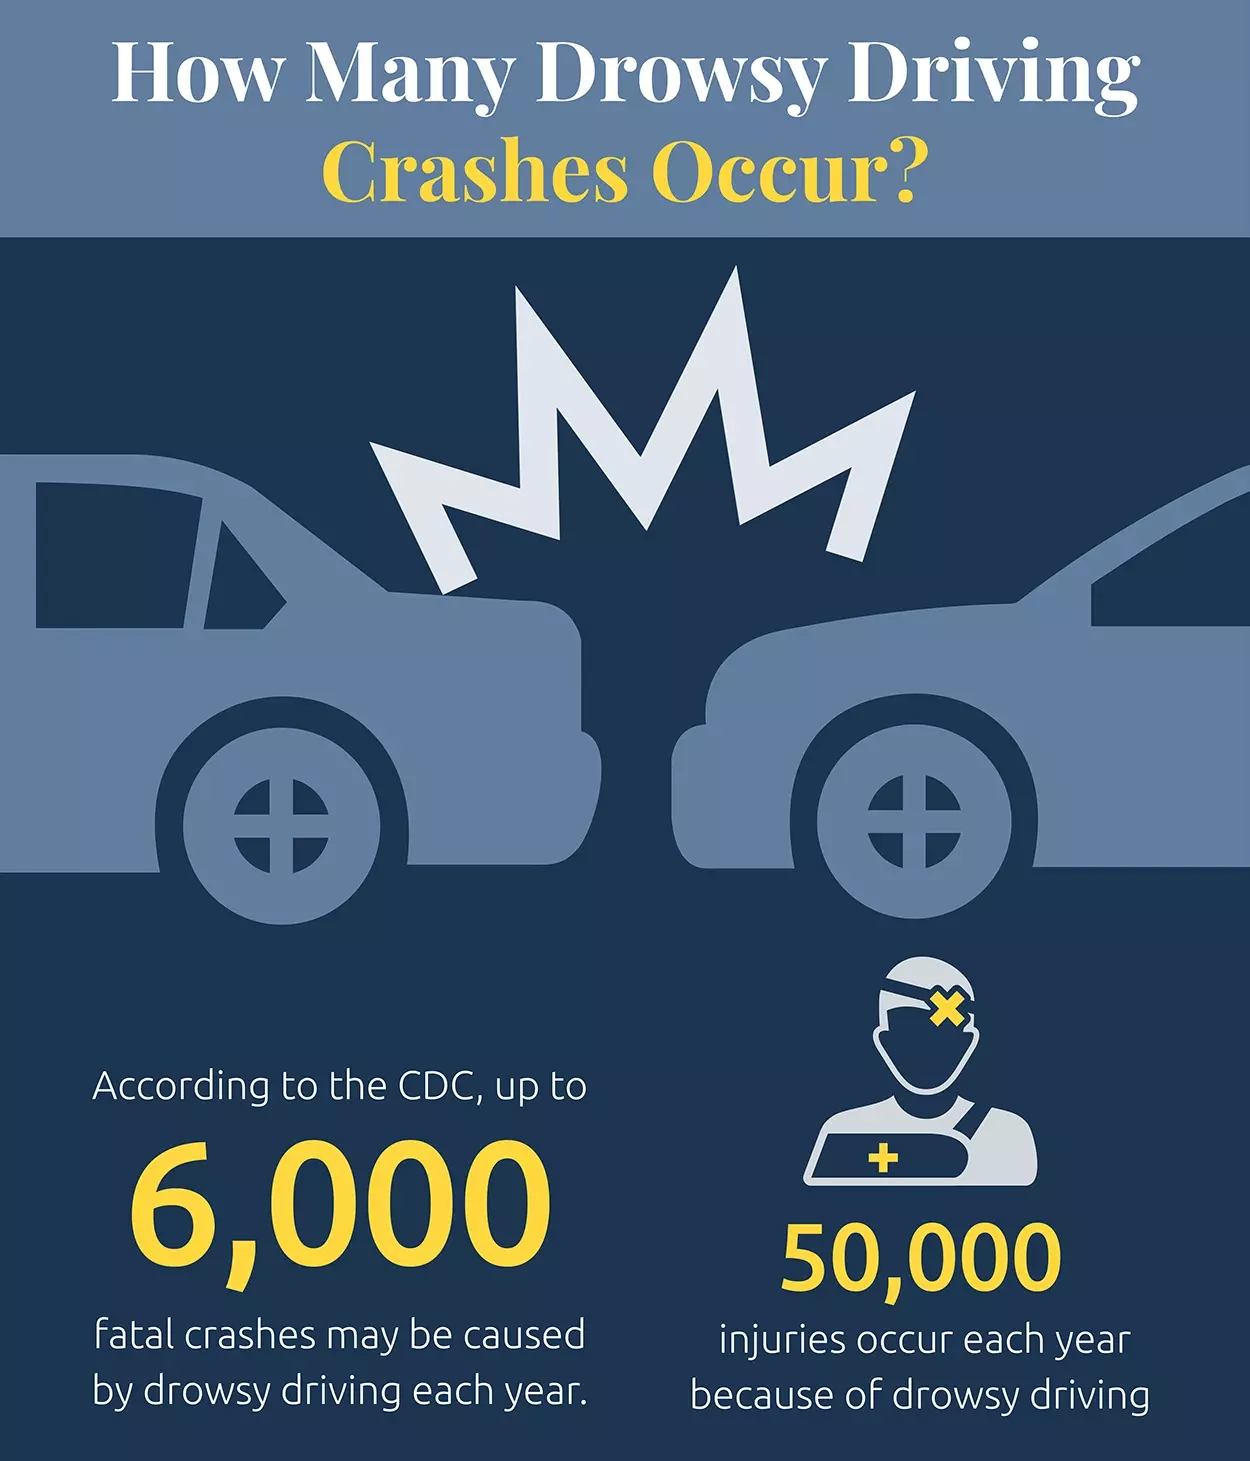 How many drowsy driving crashes occur?